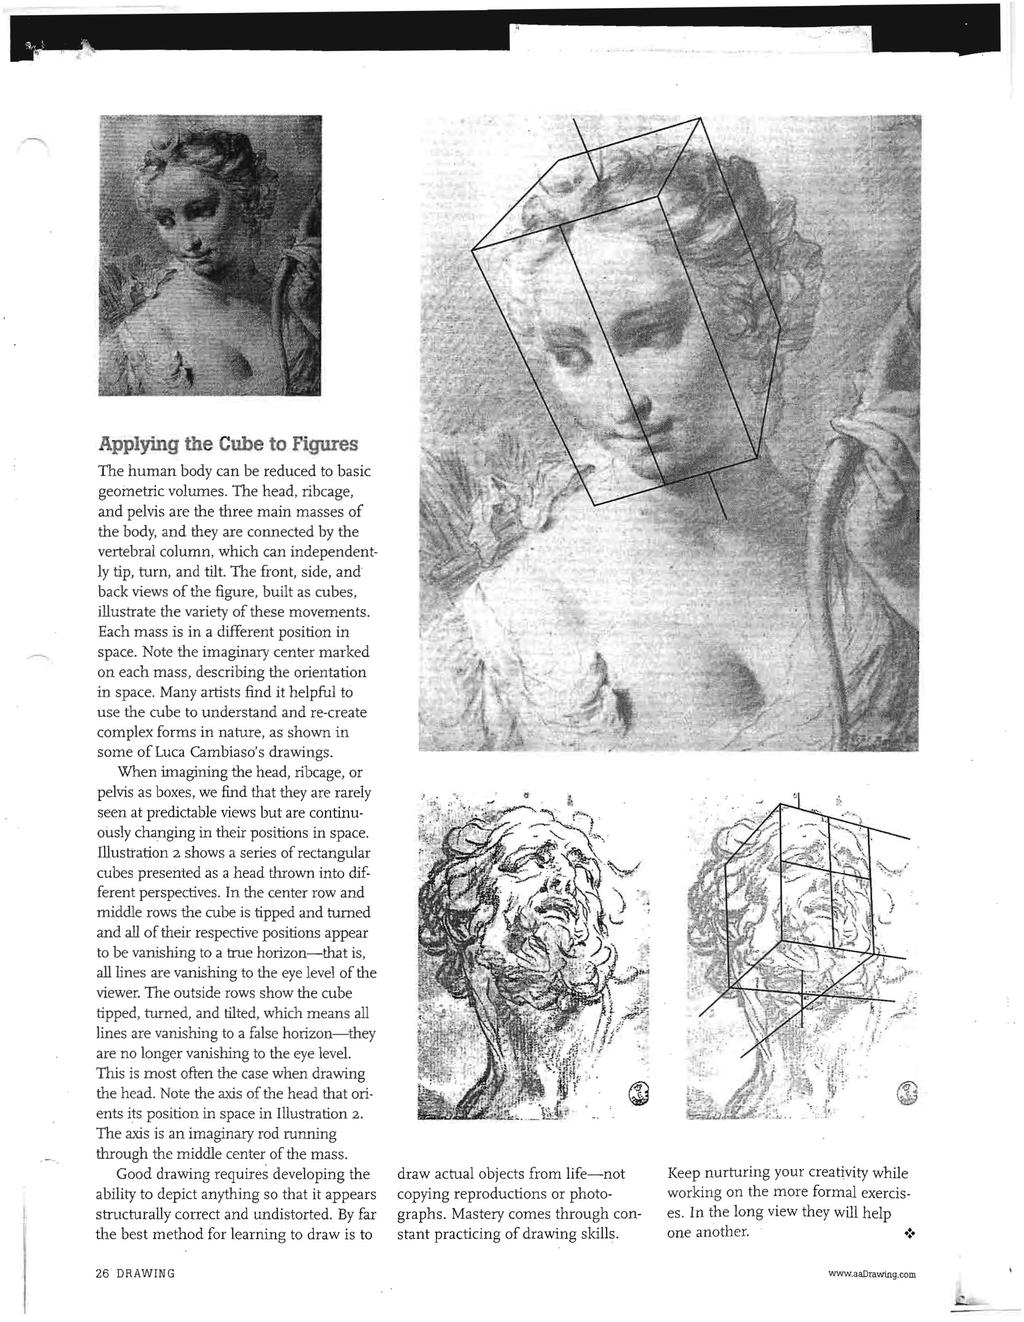 Applying the Cube to Figures The human body can be reduced to basic geometric volumes.